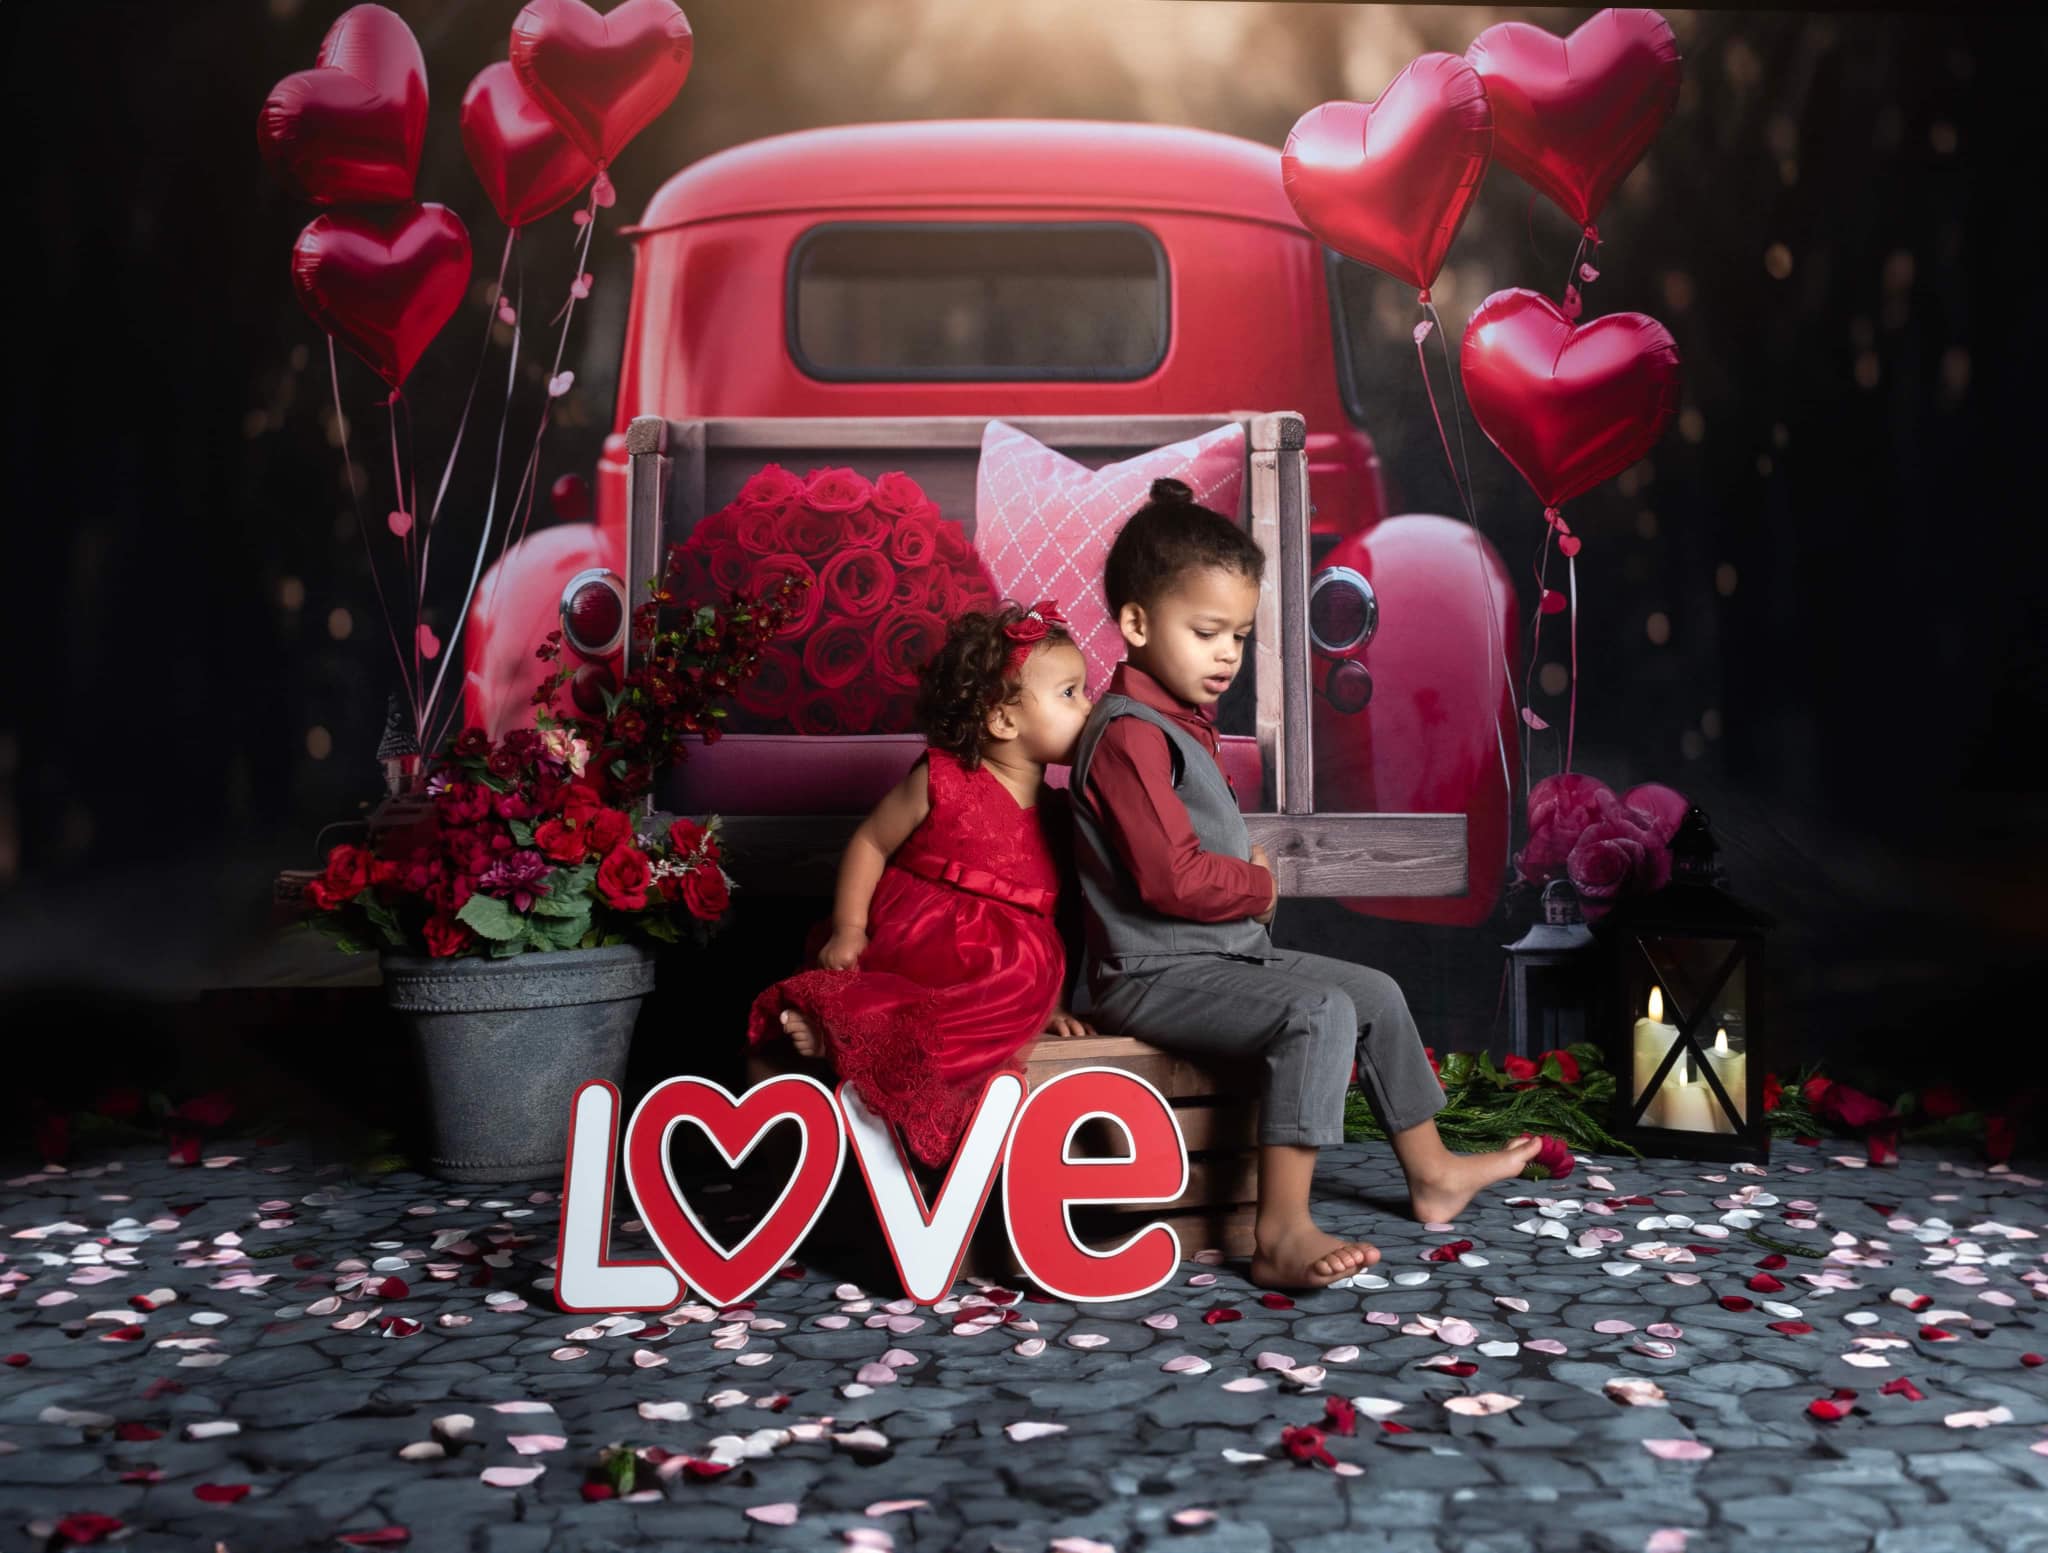 Lightning Deals-#1 Kate Valentine's Day Love Balloon Truck Backdrop Designed by Chain Photography